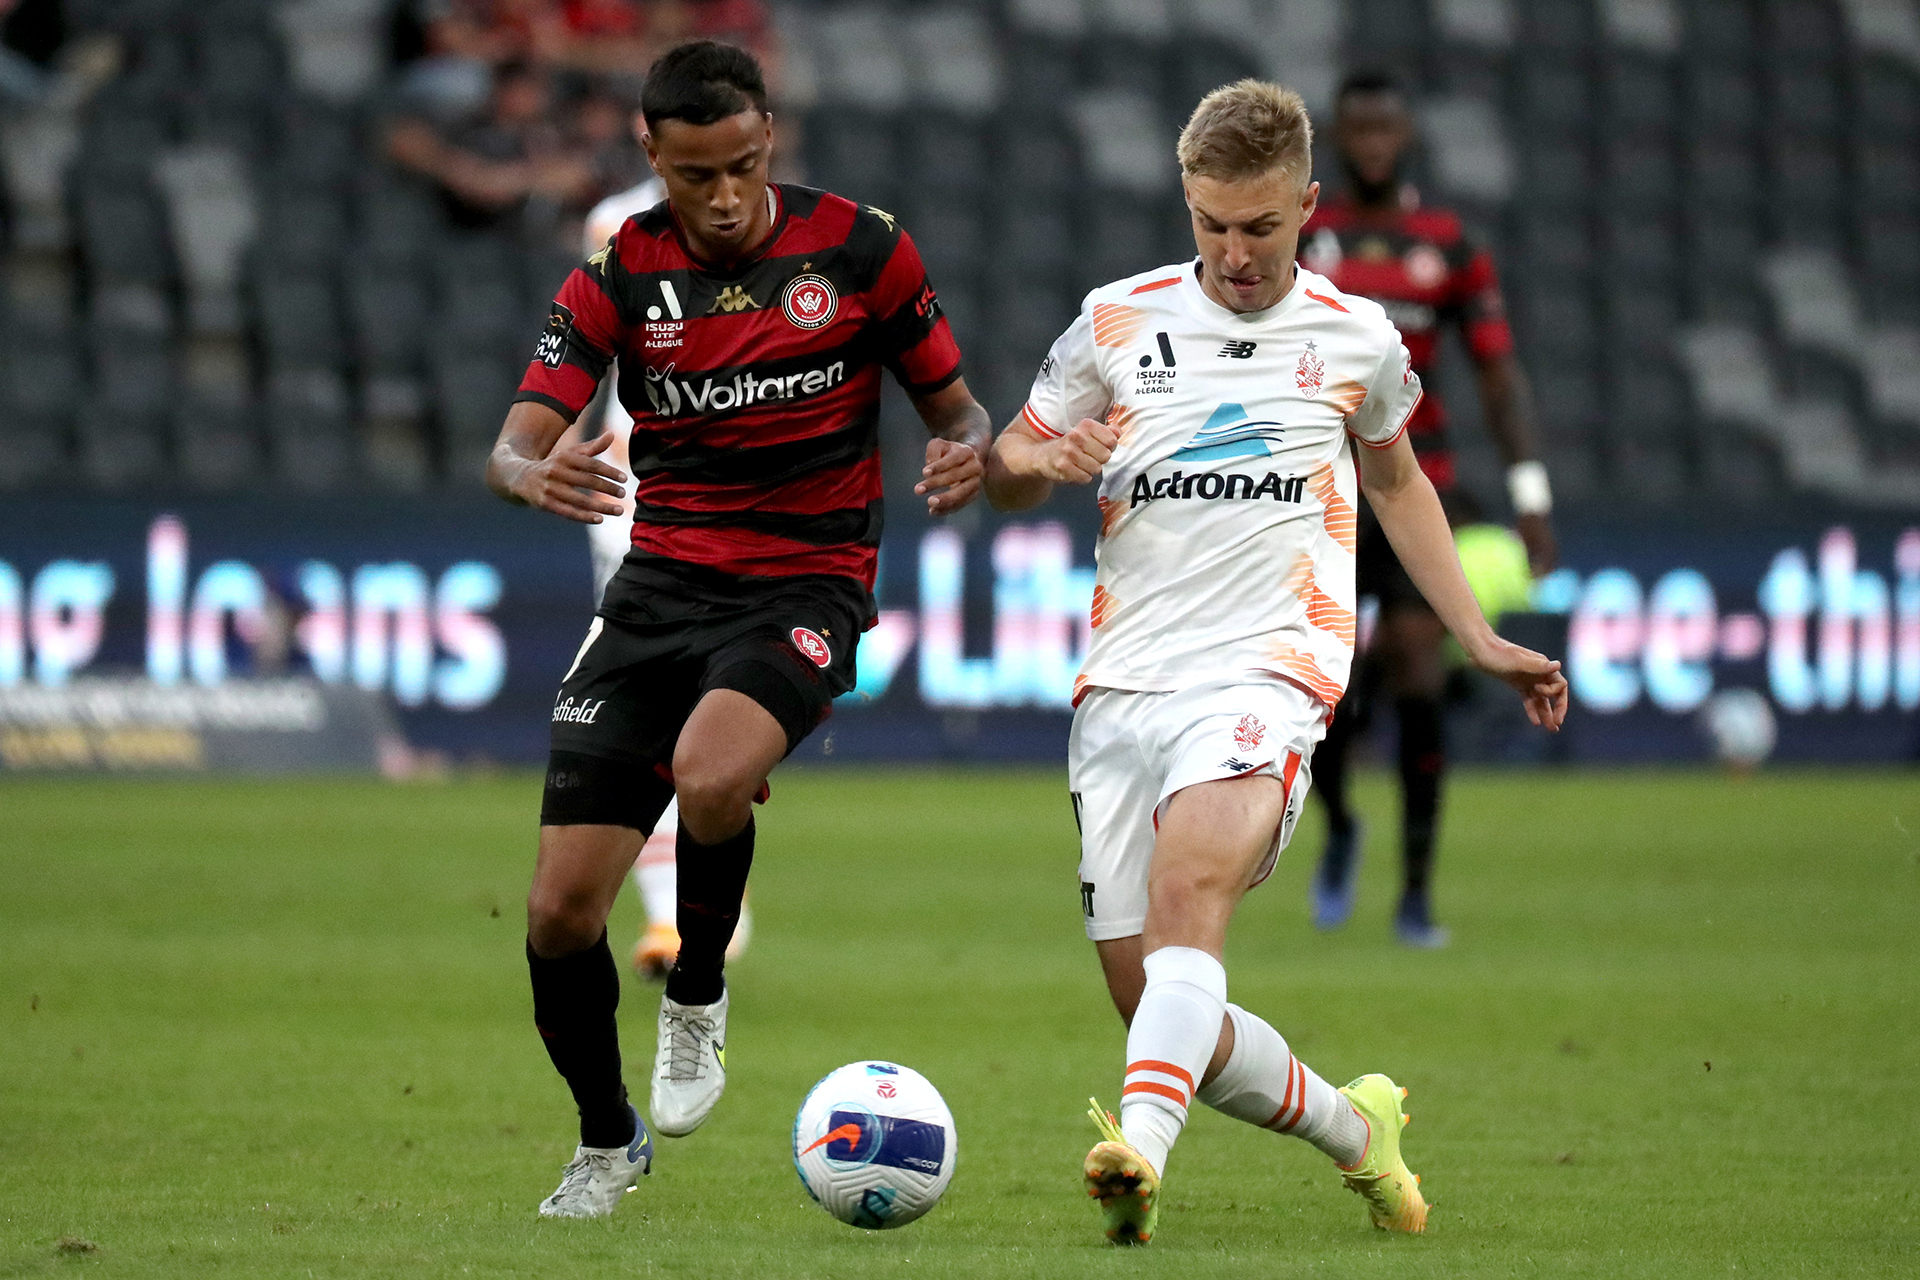 Western Sydney Wanderers and Brisbane Roar played out a 1-1 draw in April